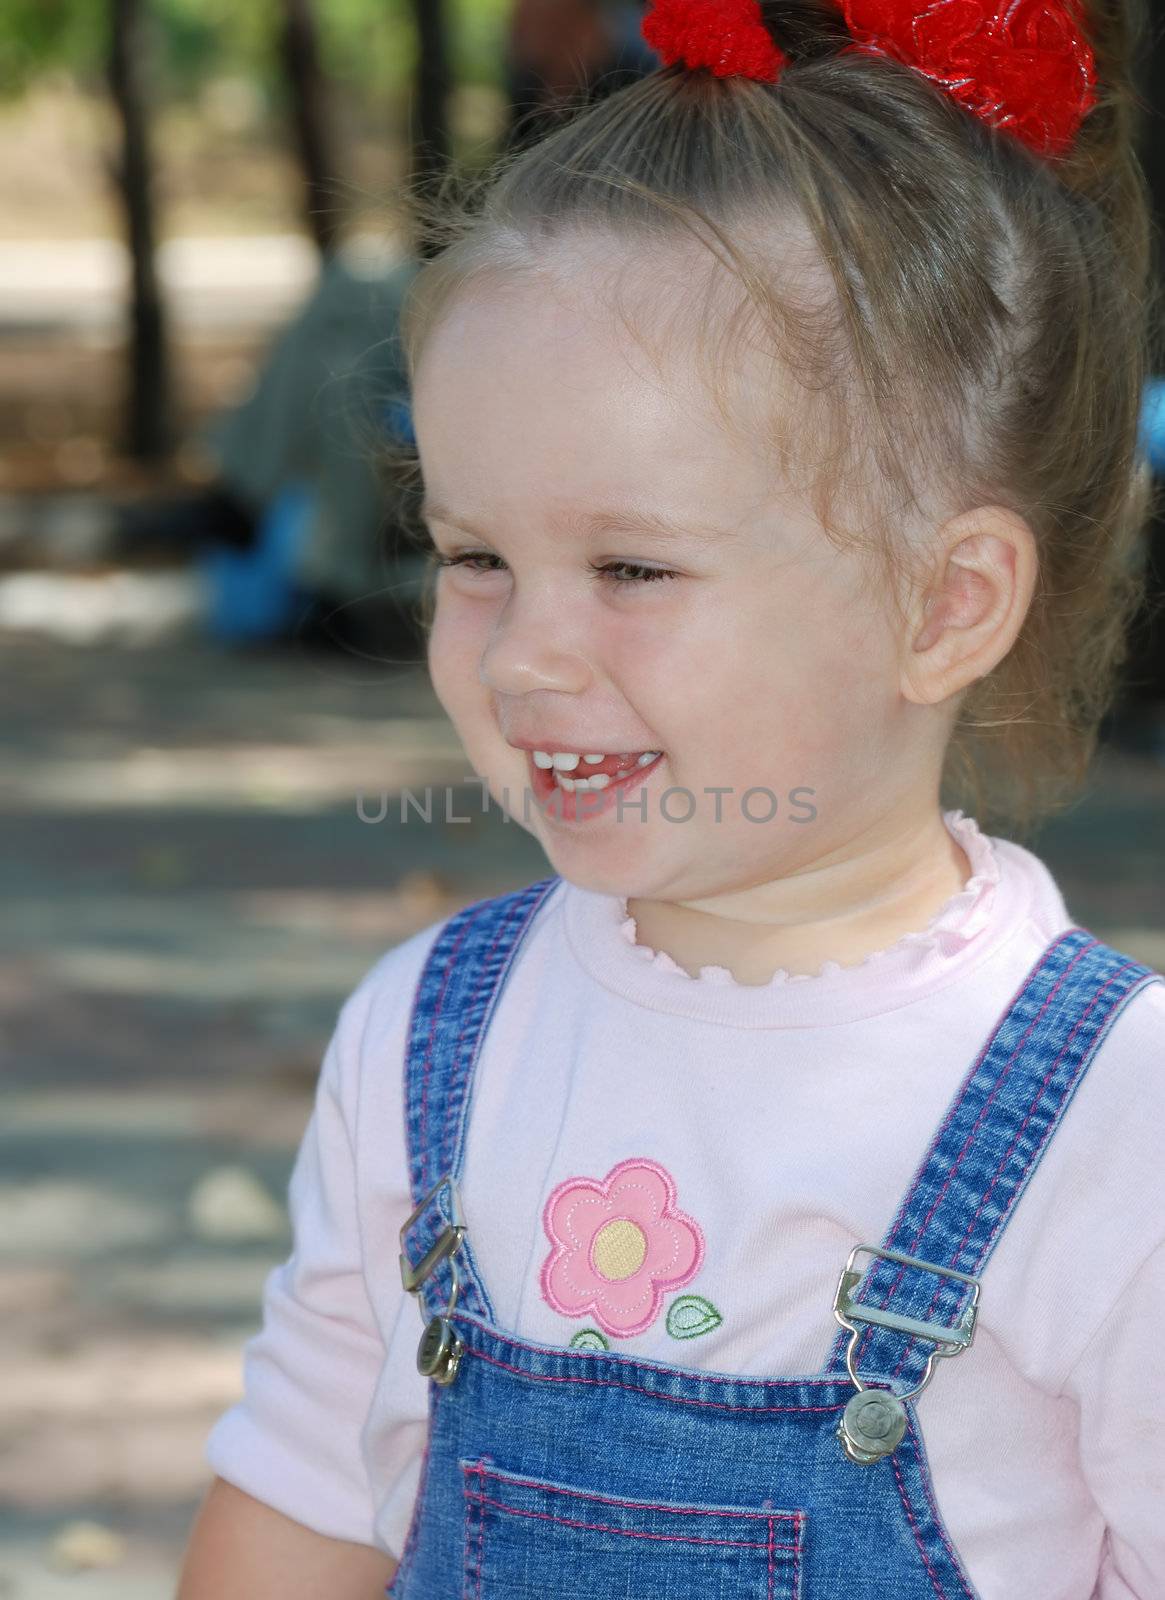 Small laughing the girl. Age - 2 years